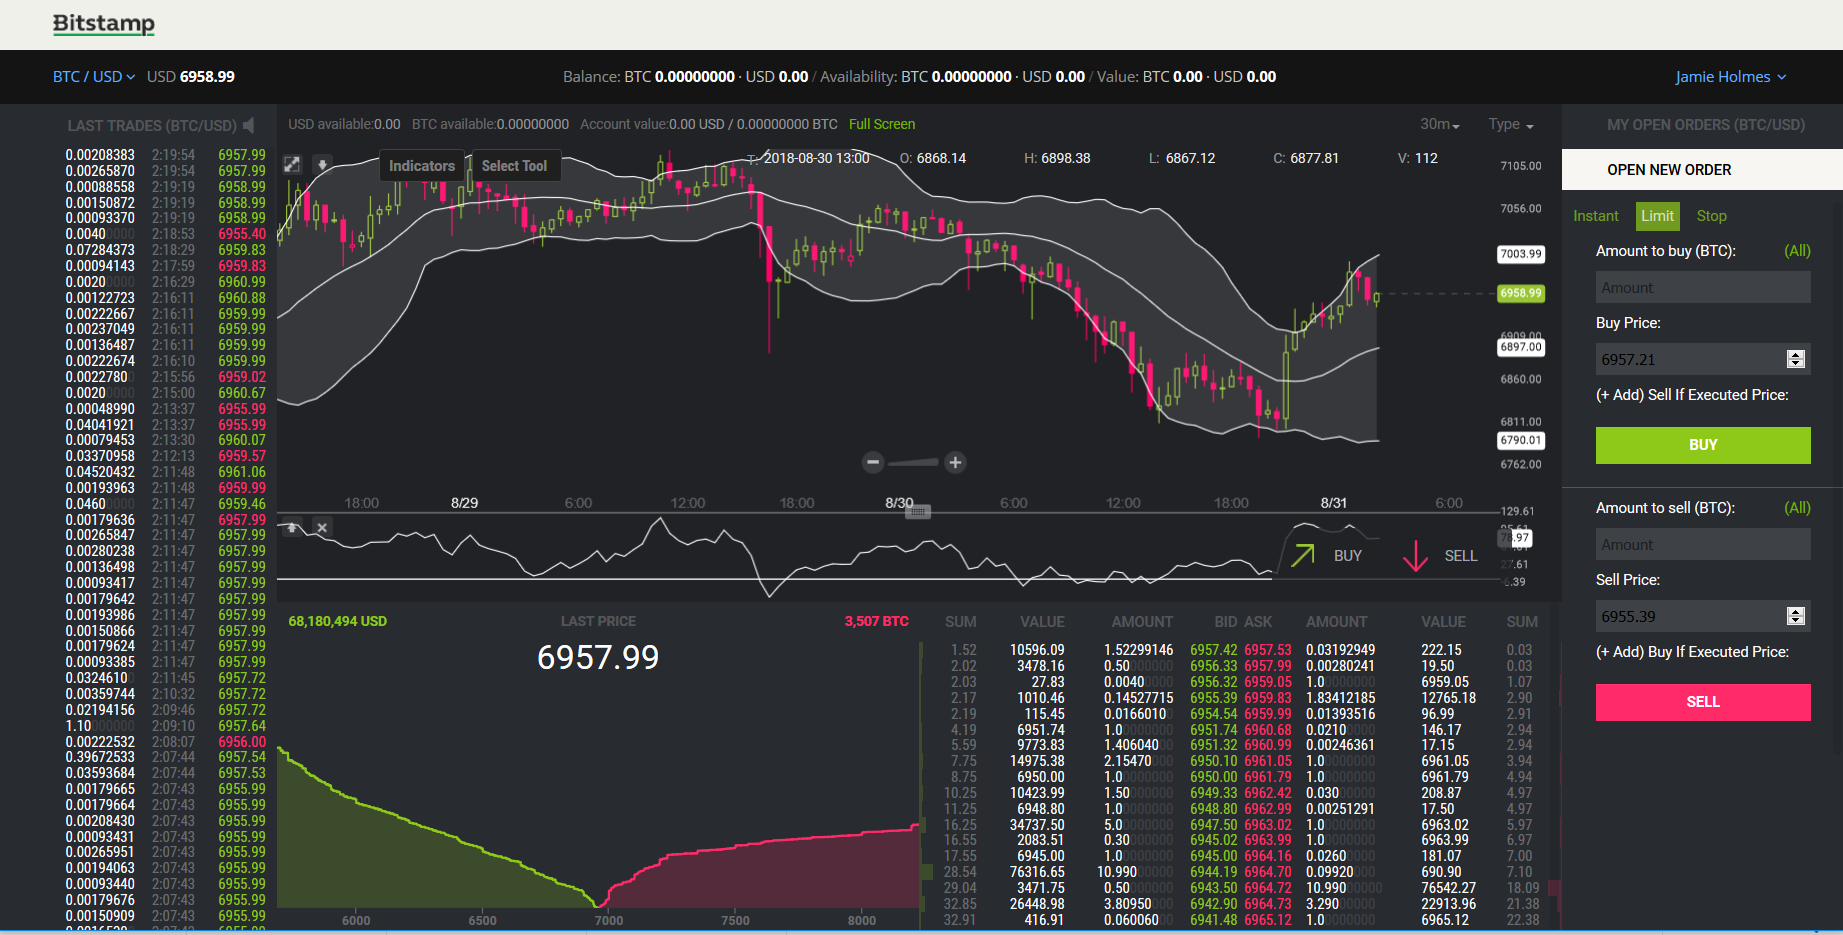 trading limits on bitstamp